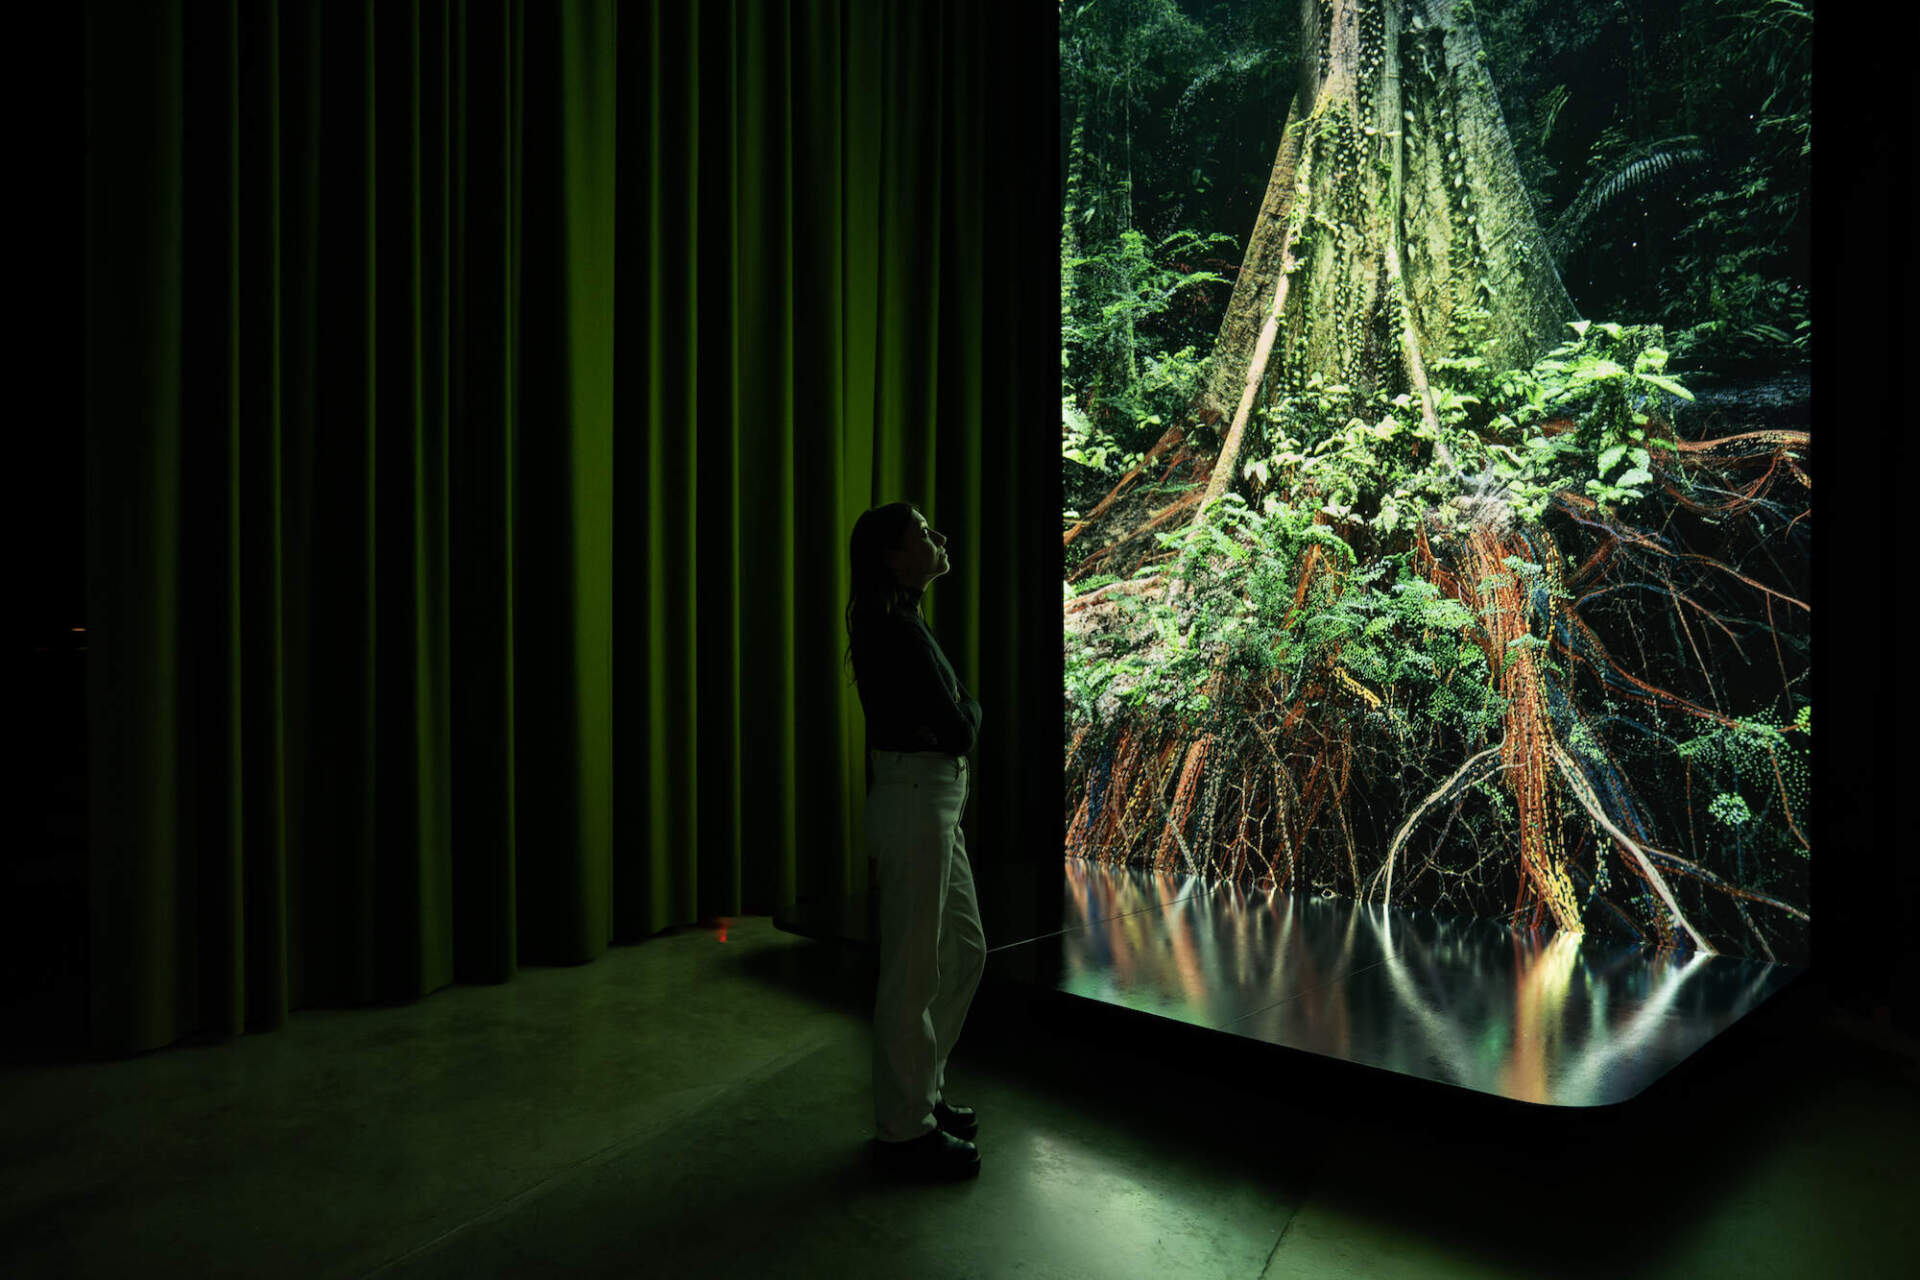 Marshmallow Laser Feast in collaboration with James Bulley and Andres Roberts, "Sanctuary of the Unseen Forest," 2022. Installation view of the "Our Time on Earth" exhibition at the Barbican Centre in London. (Courtesy of the artist and Sandra Ciampone)